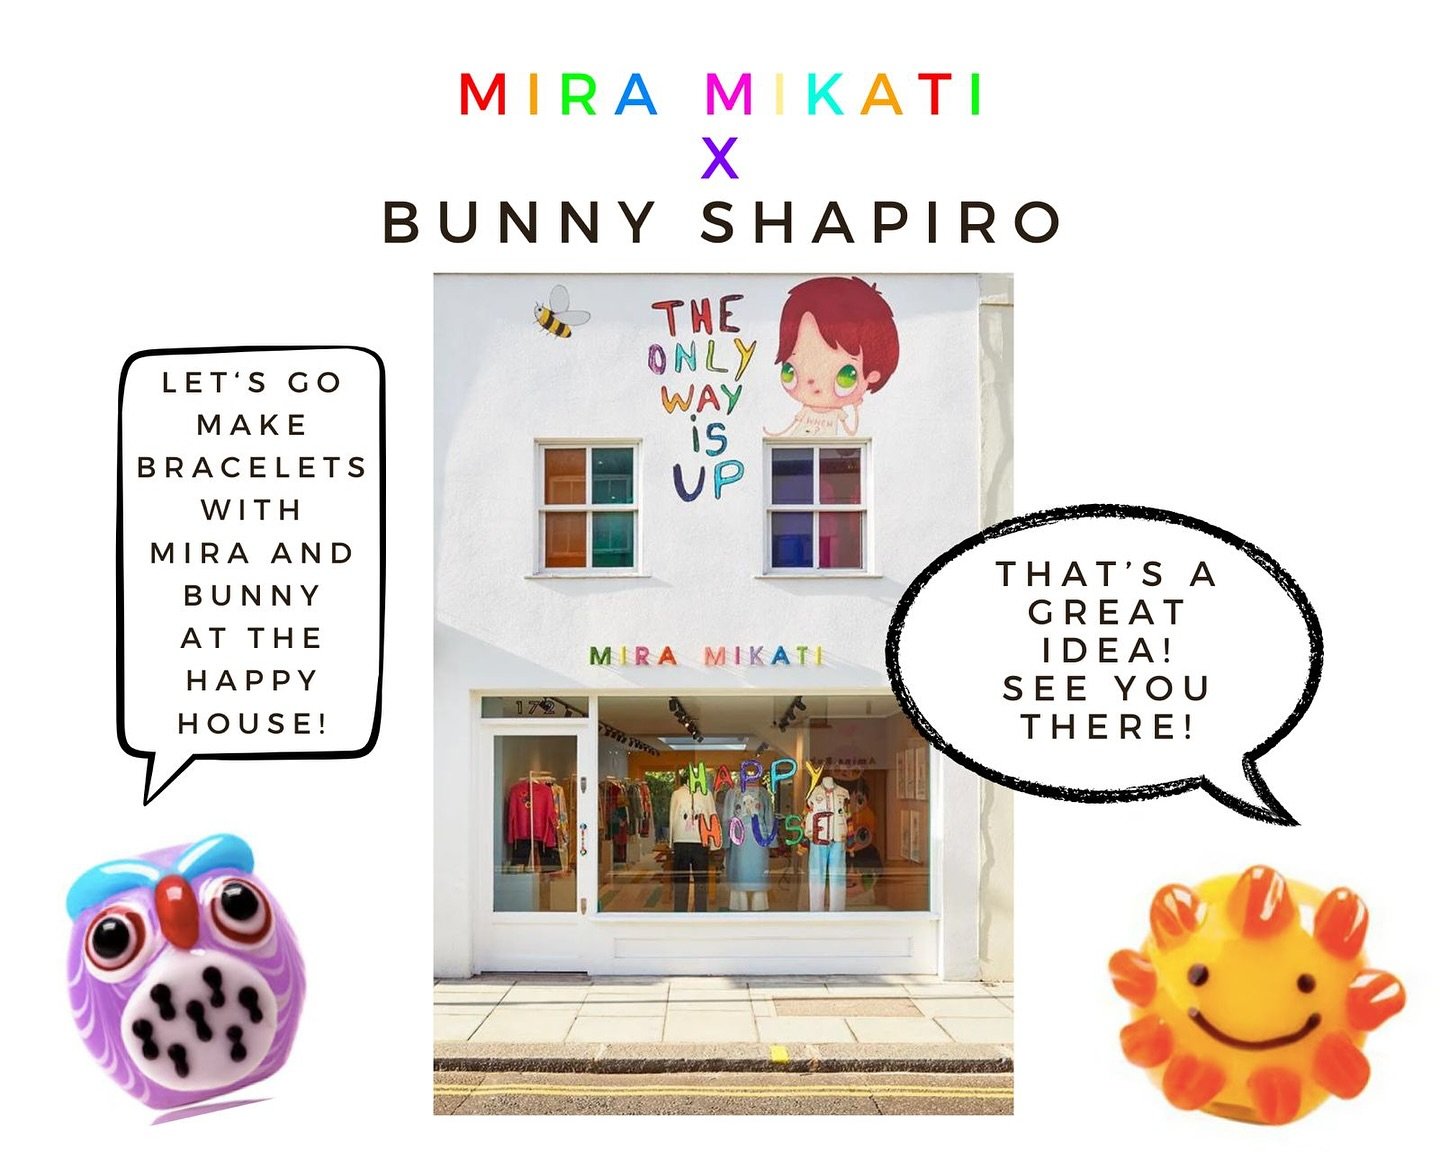 NEXT TUESDAY May 14 - Come make a #custom #bracelet with me at @miramikati #happyhouse in #chelsea #london and #shop the collection.  Can&rsquo;t wait to see you there. 🌈🌈🌈
.
.
.
#londonuk #miramikati #bunnyshapiro #beadedjewelry #jewelry #jewelle